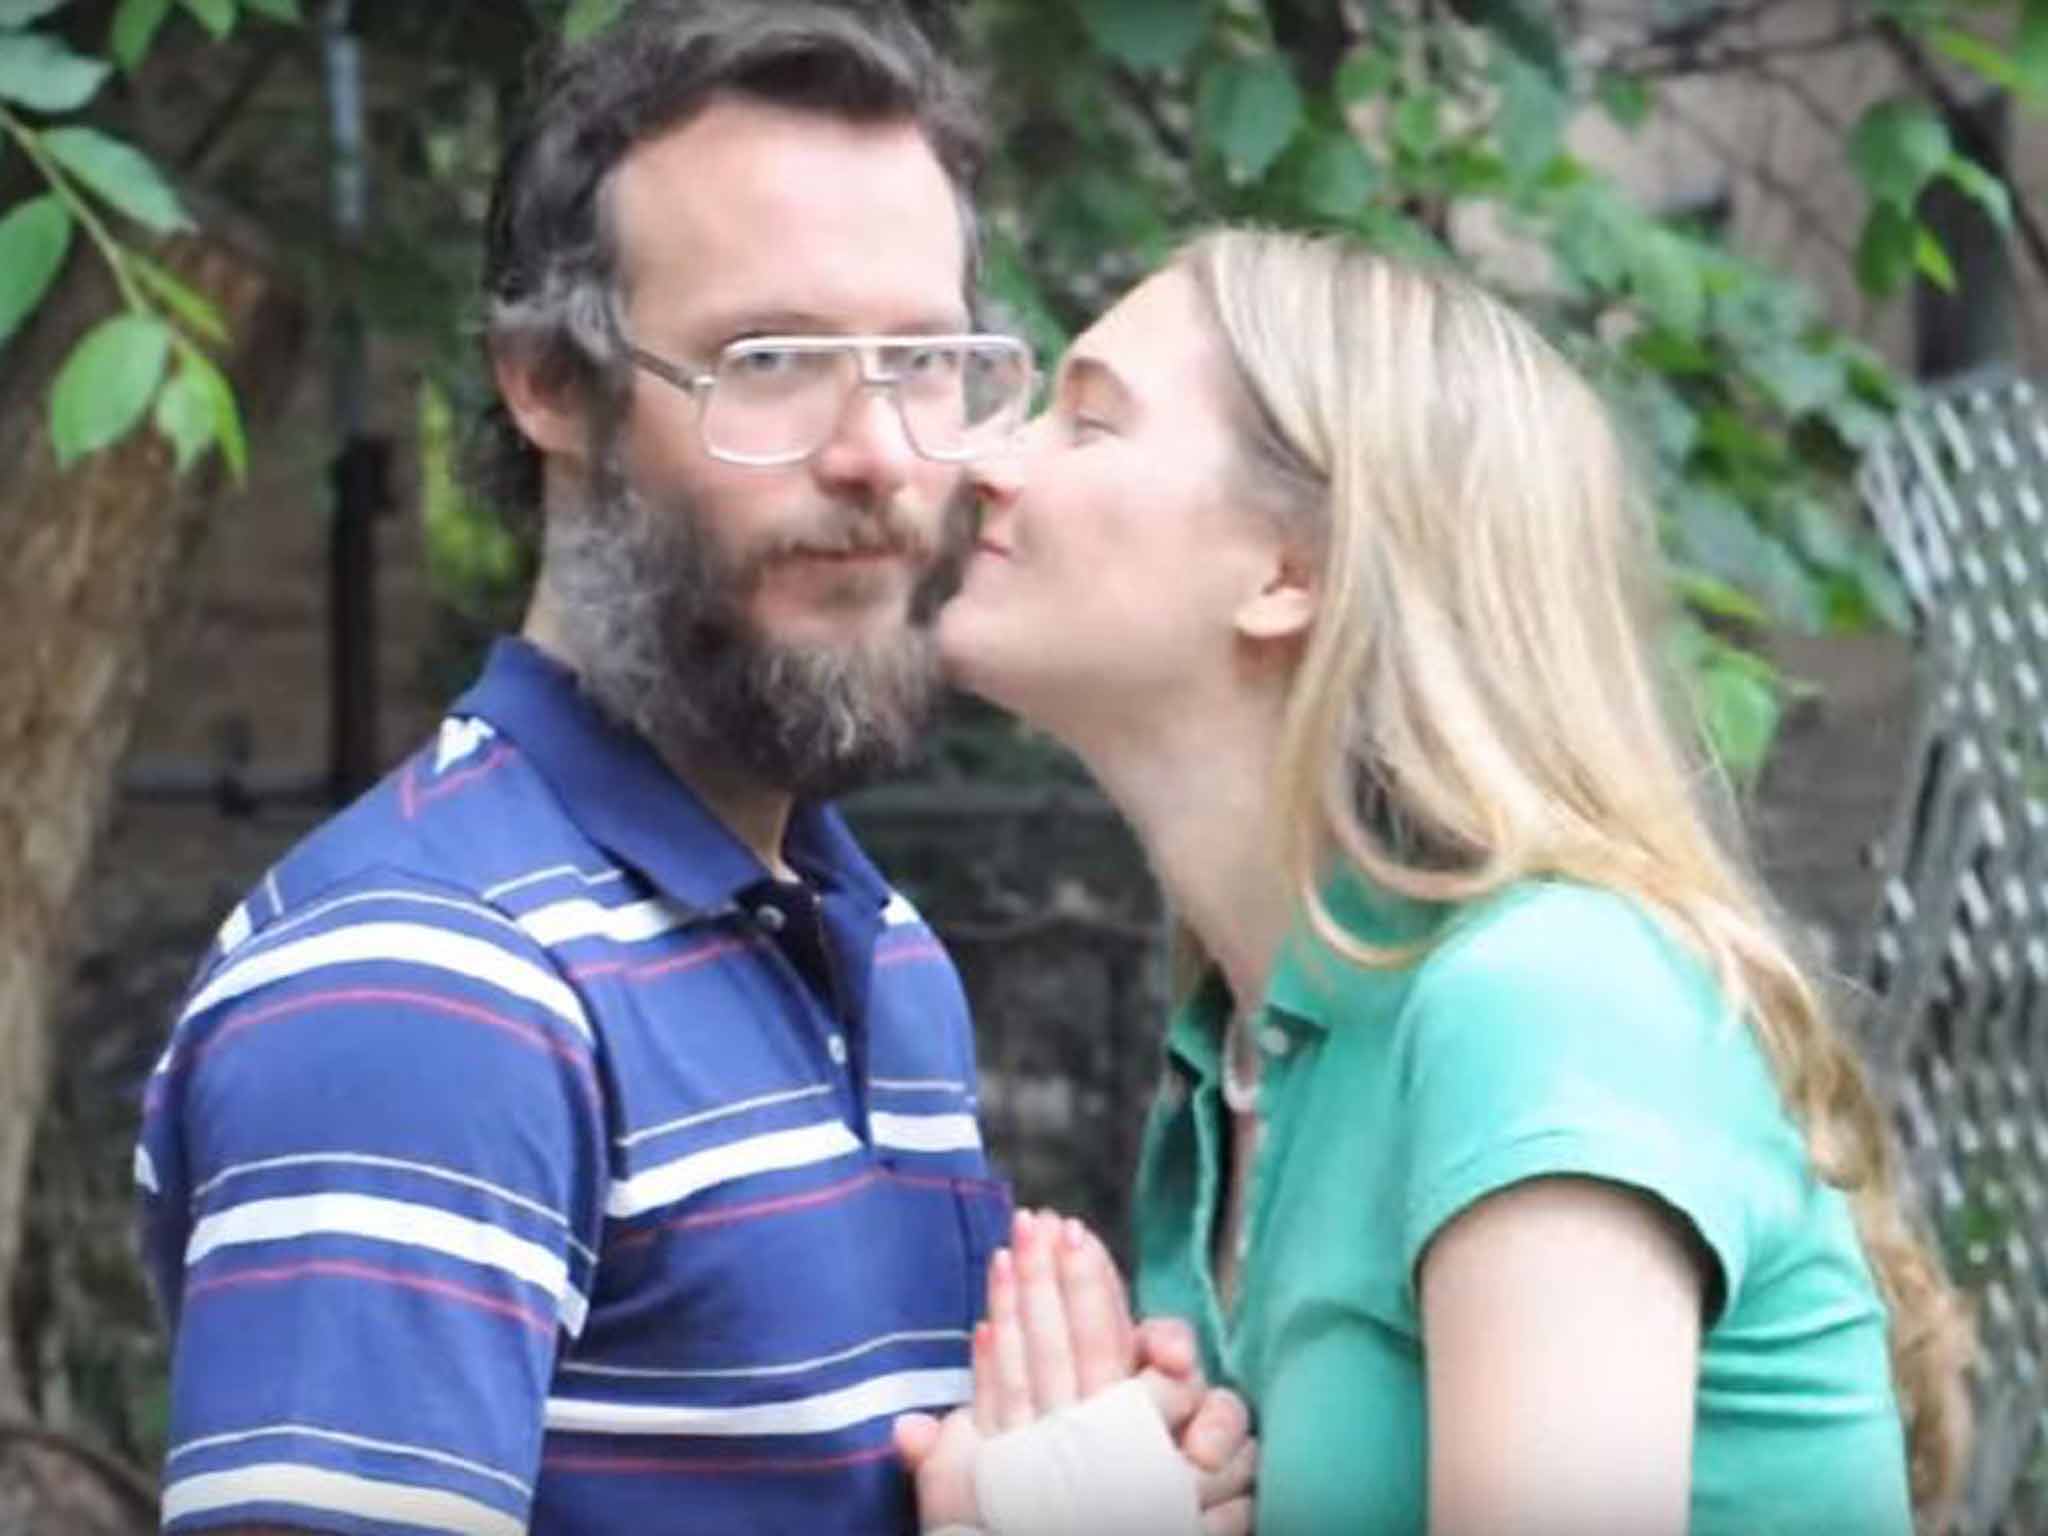 Jena Friedman with Ben Kronberg in 'Ted and Gracie', a parody of the 'Vows' series in 'The New York Times'